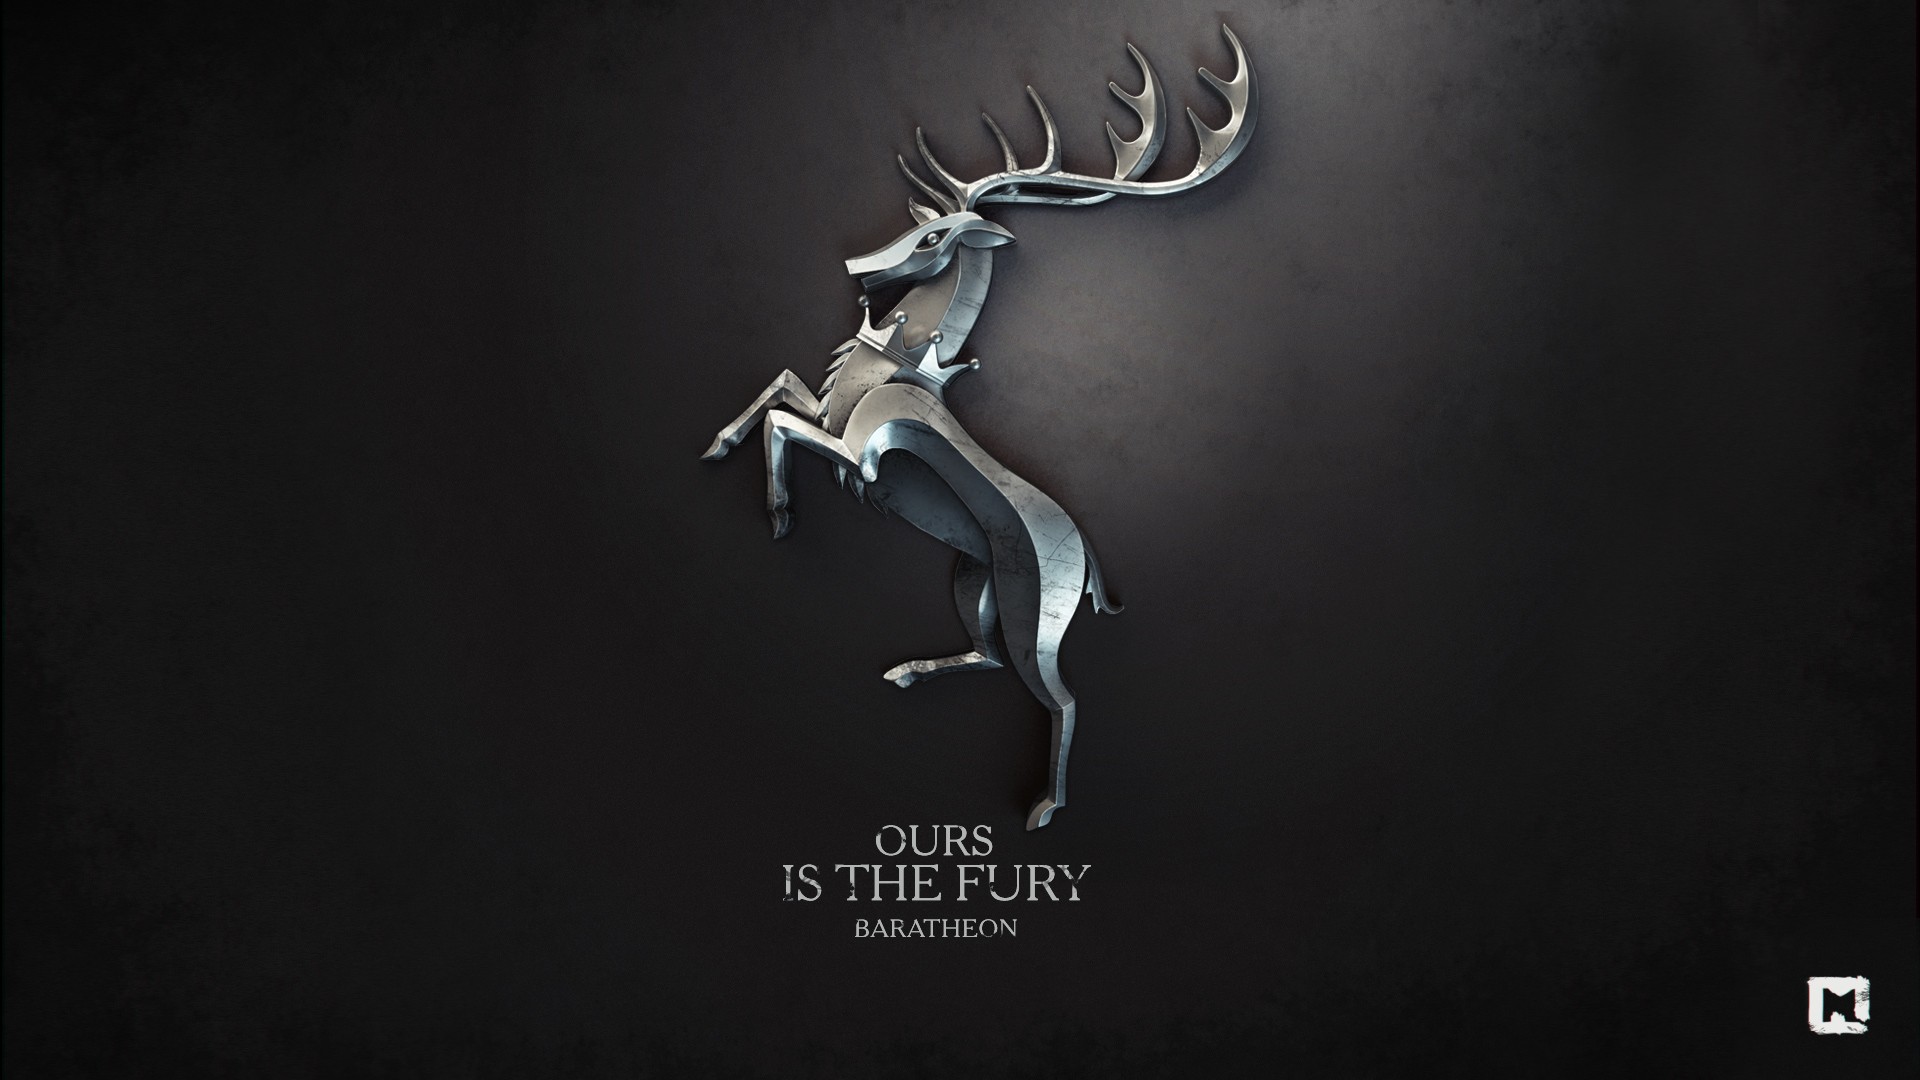 Game Of Thrones A Song Of Ice And Fire Digital Art Sigils House Baratheon 1920x1080